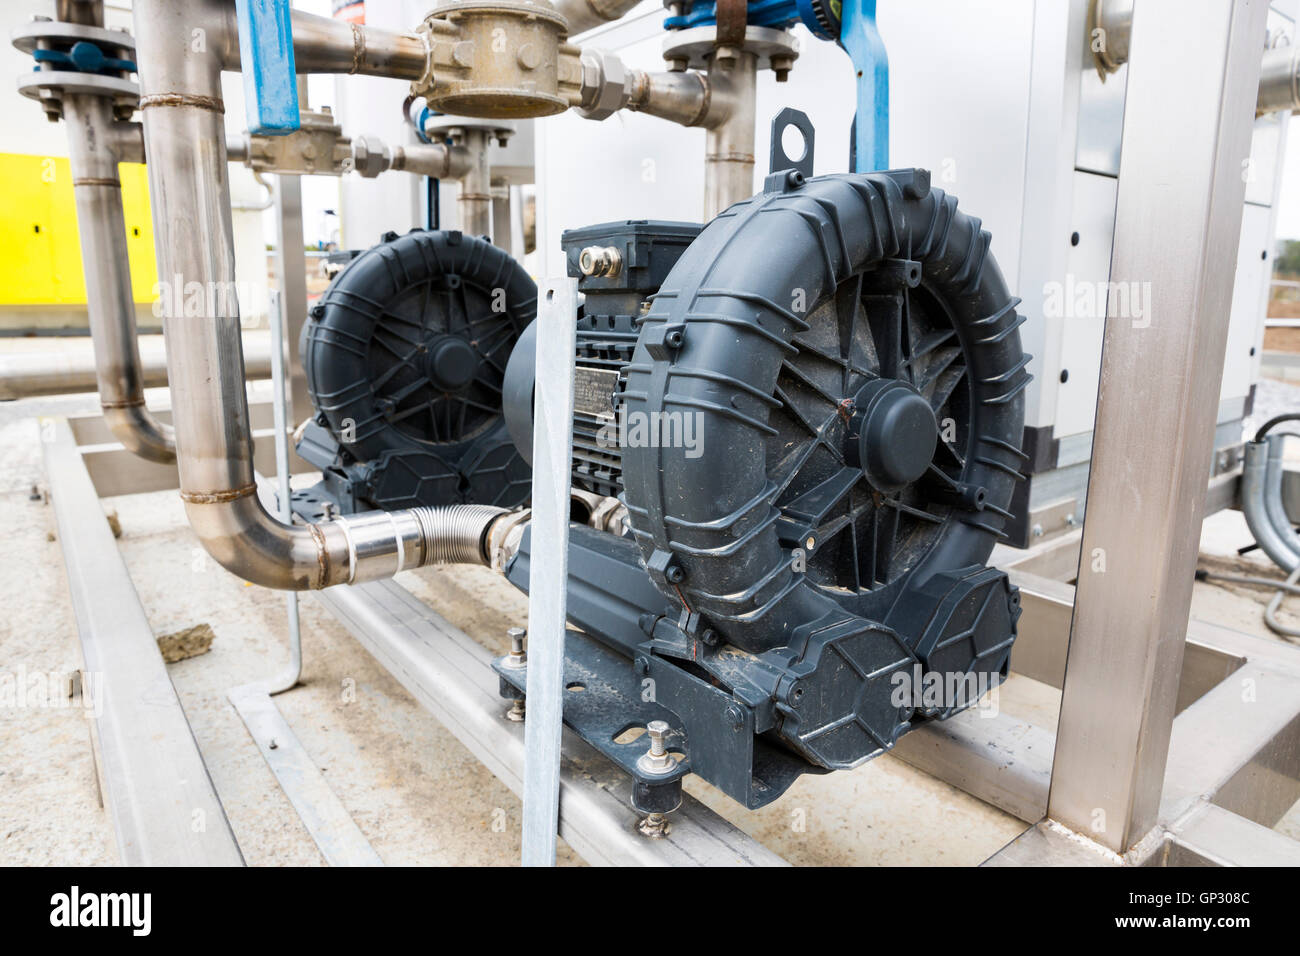 Electrical motor in wastewater treatment plant. Wastewater treatment is a process used to convert dirty wastewater into an efflu Stock Photo